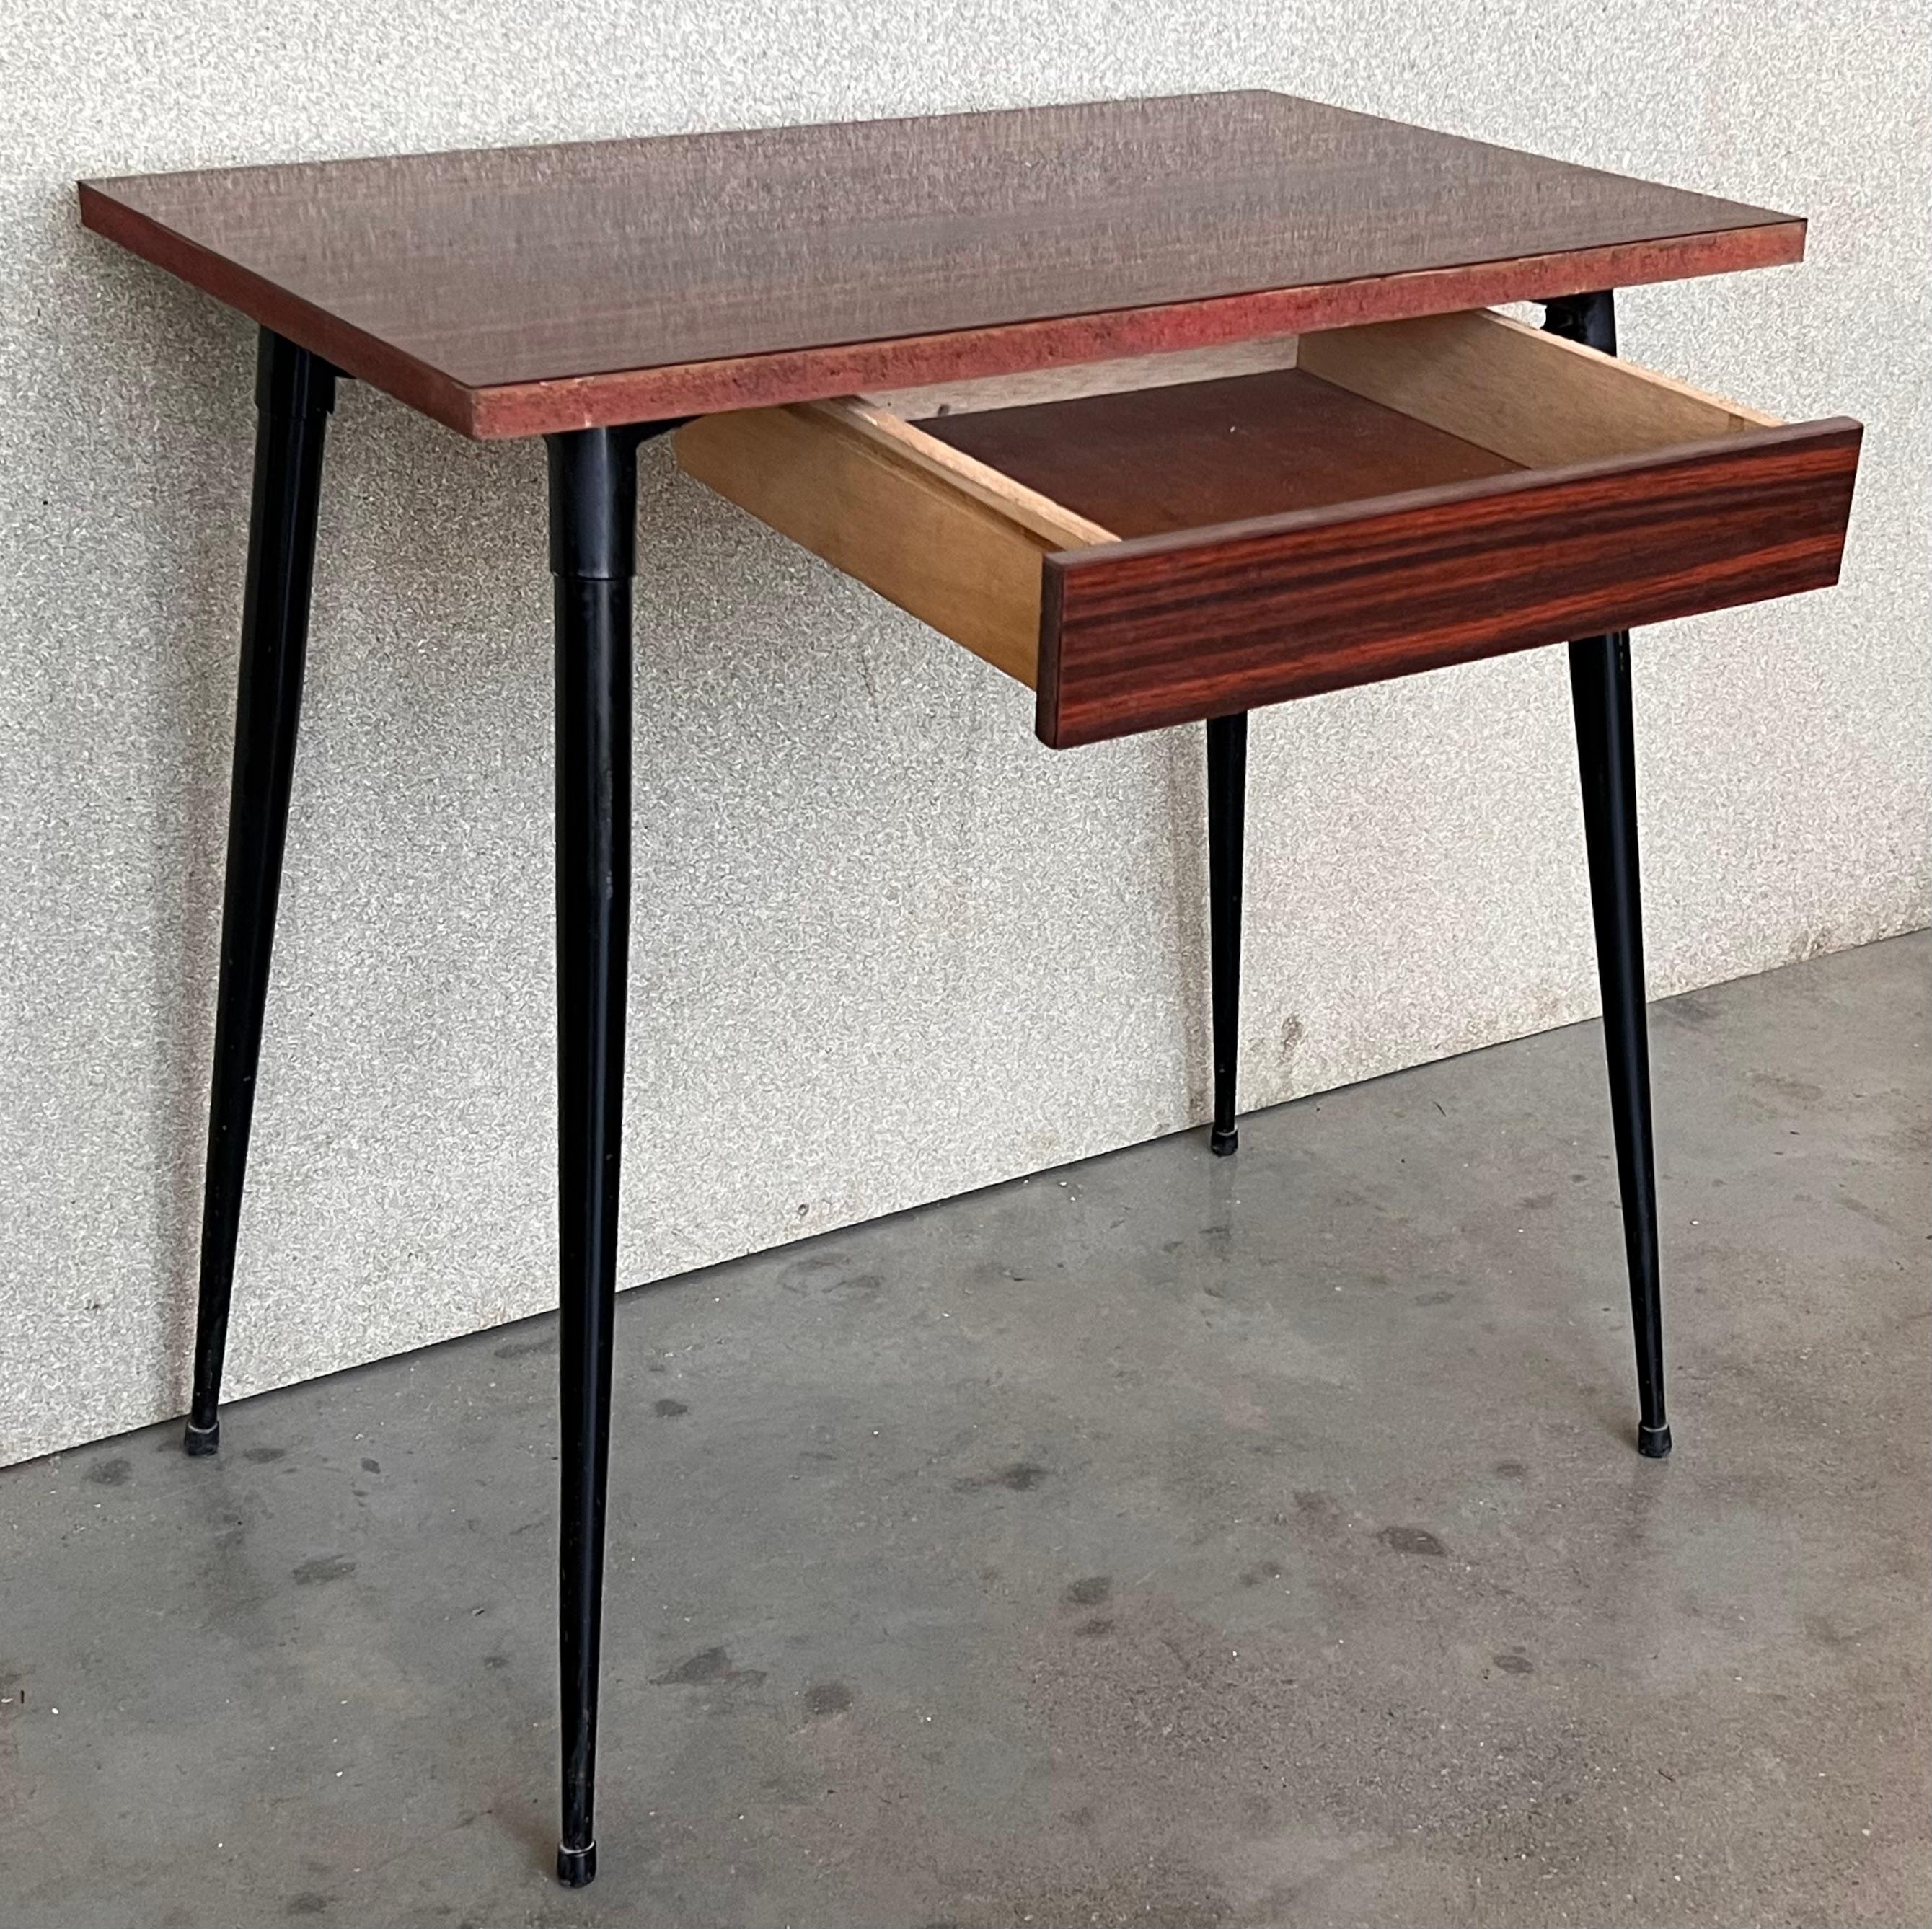 Spanish Mid Century Modern School Desk with drawer and Iron Legs, 8 pieces available For Sale